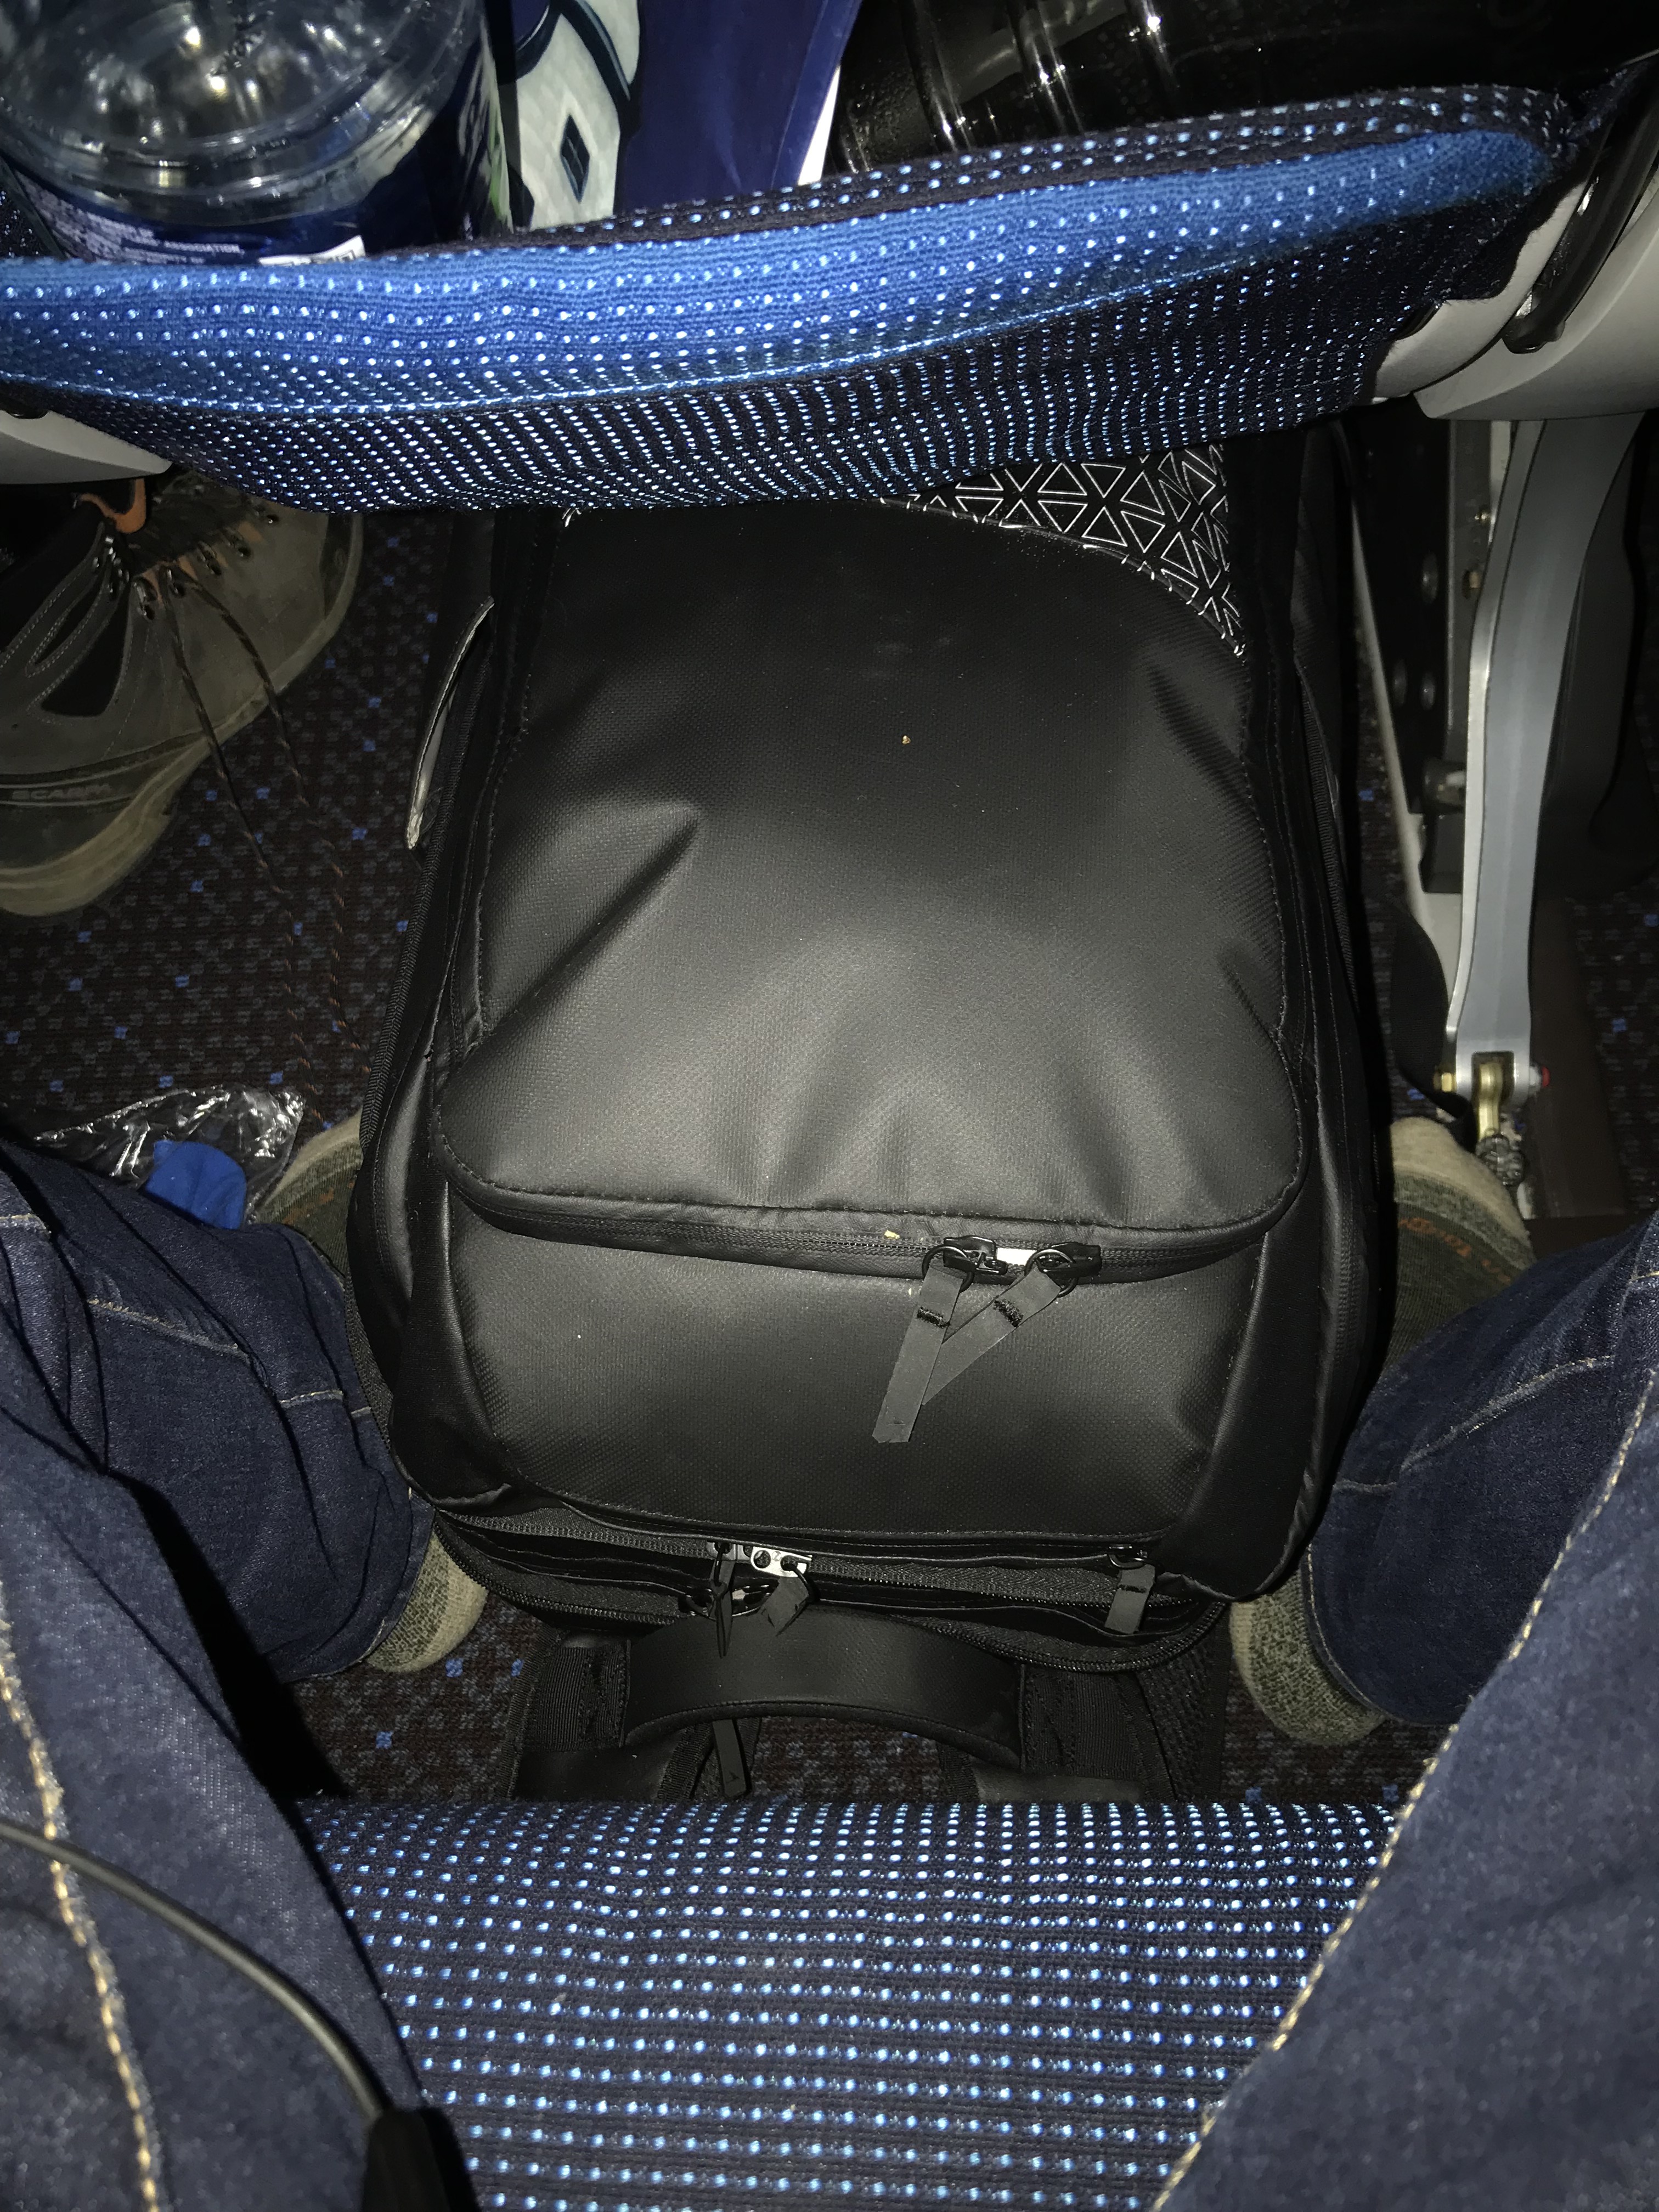 backpacks for under airline seats